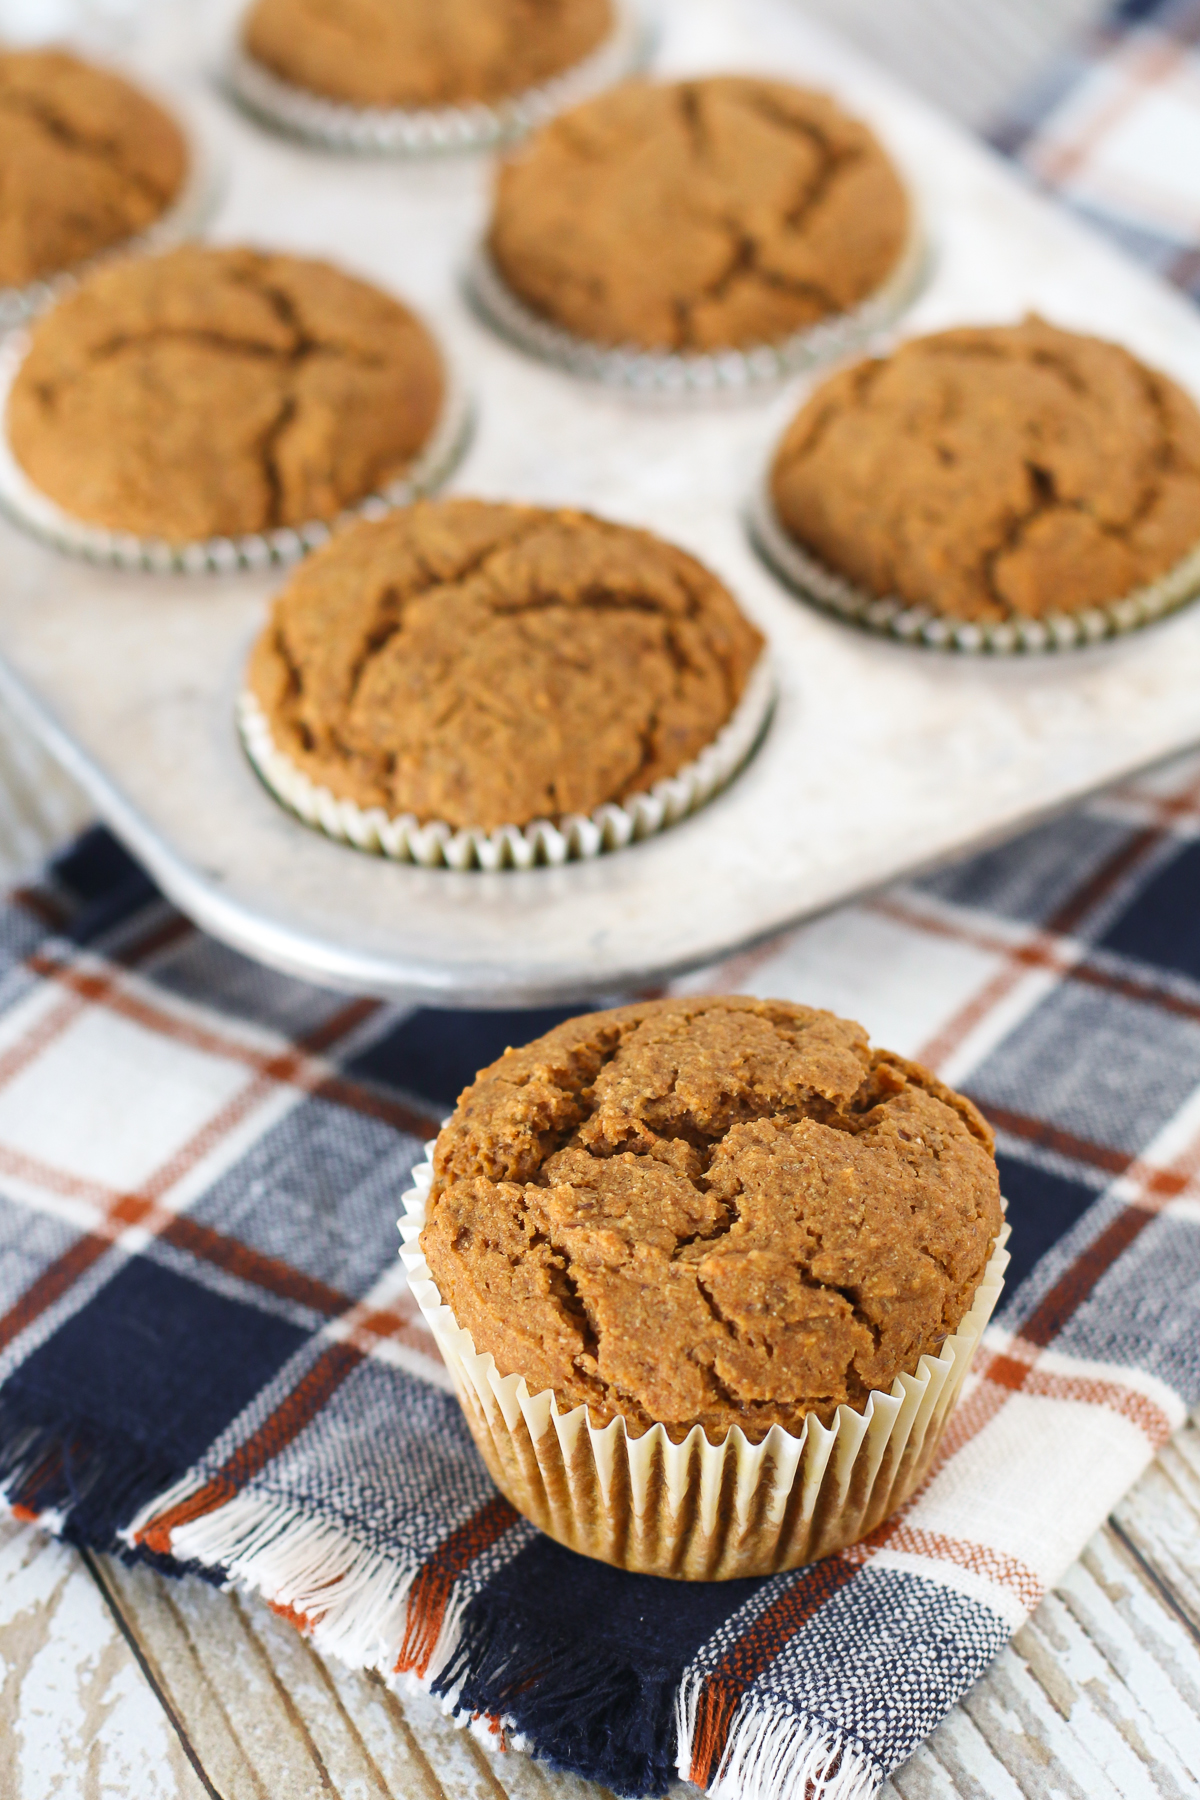 Gluten Free Vegan Pumpkin Spice Muffins. These naturally sweetened pumpkin muffins have all the warm spices we love. They are fall-tastic!